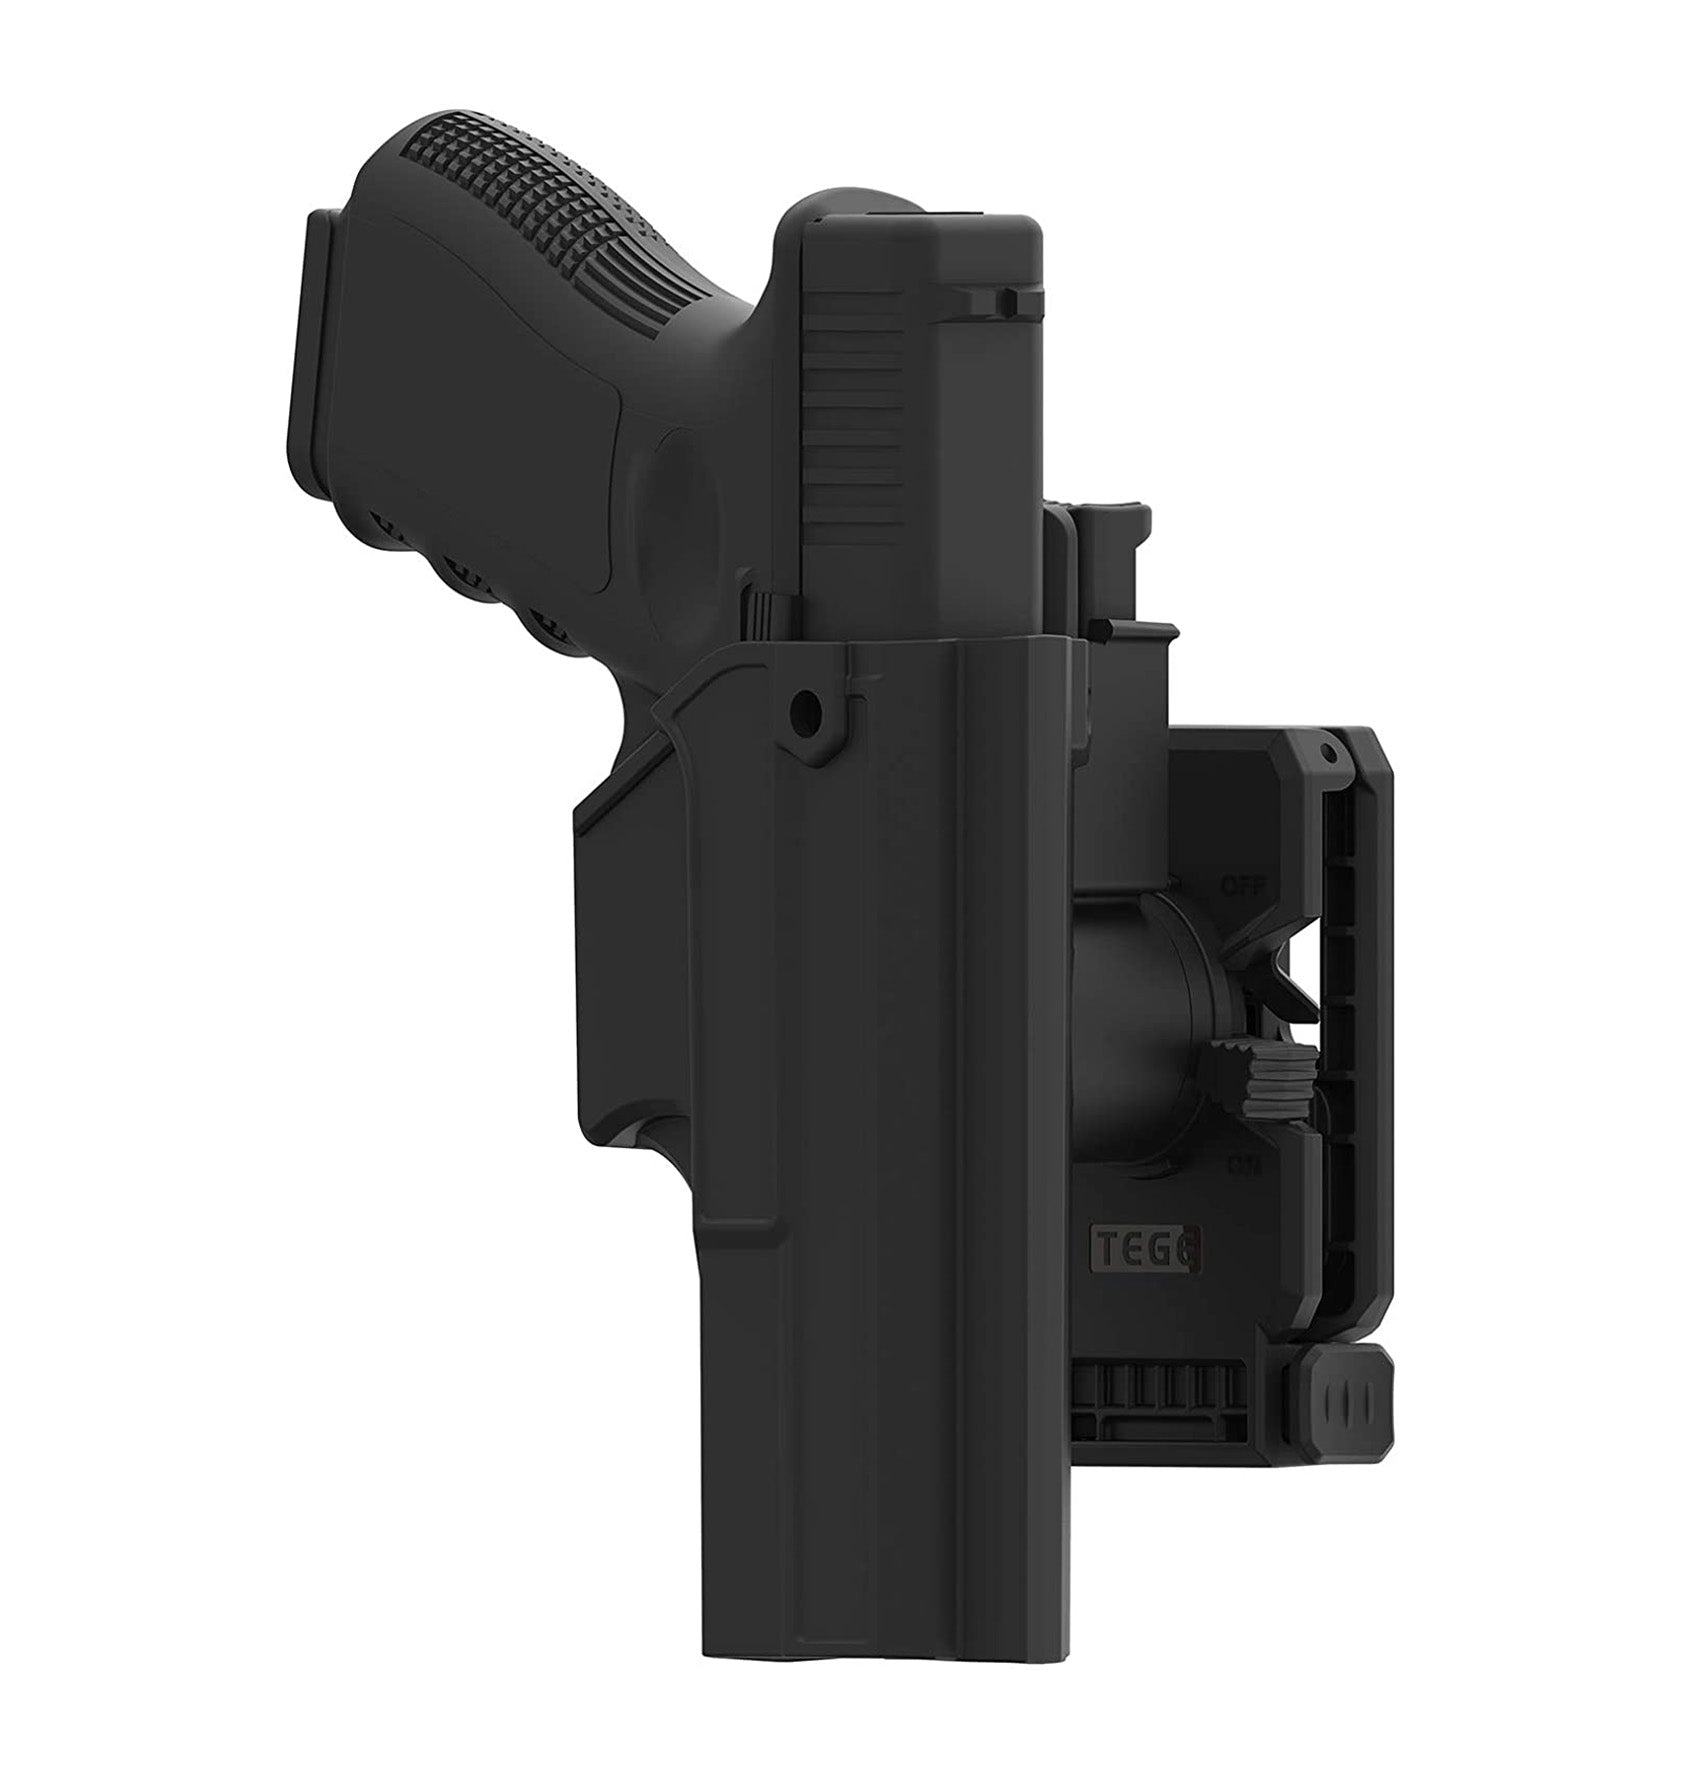 Thumb Release Holster for Glock 17 22 31 Gen 1-5 with Belt clip